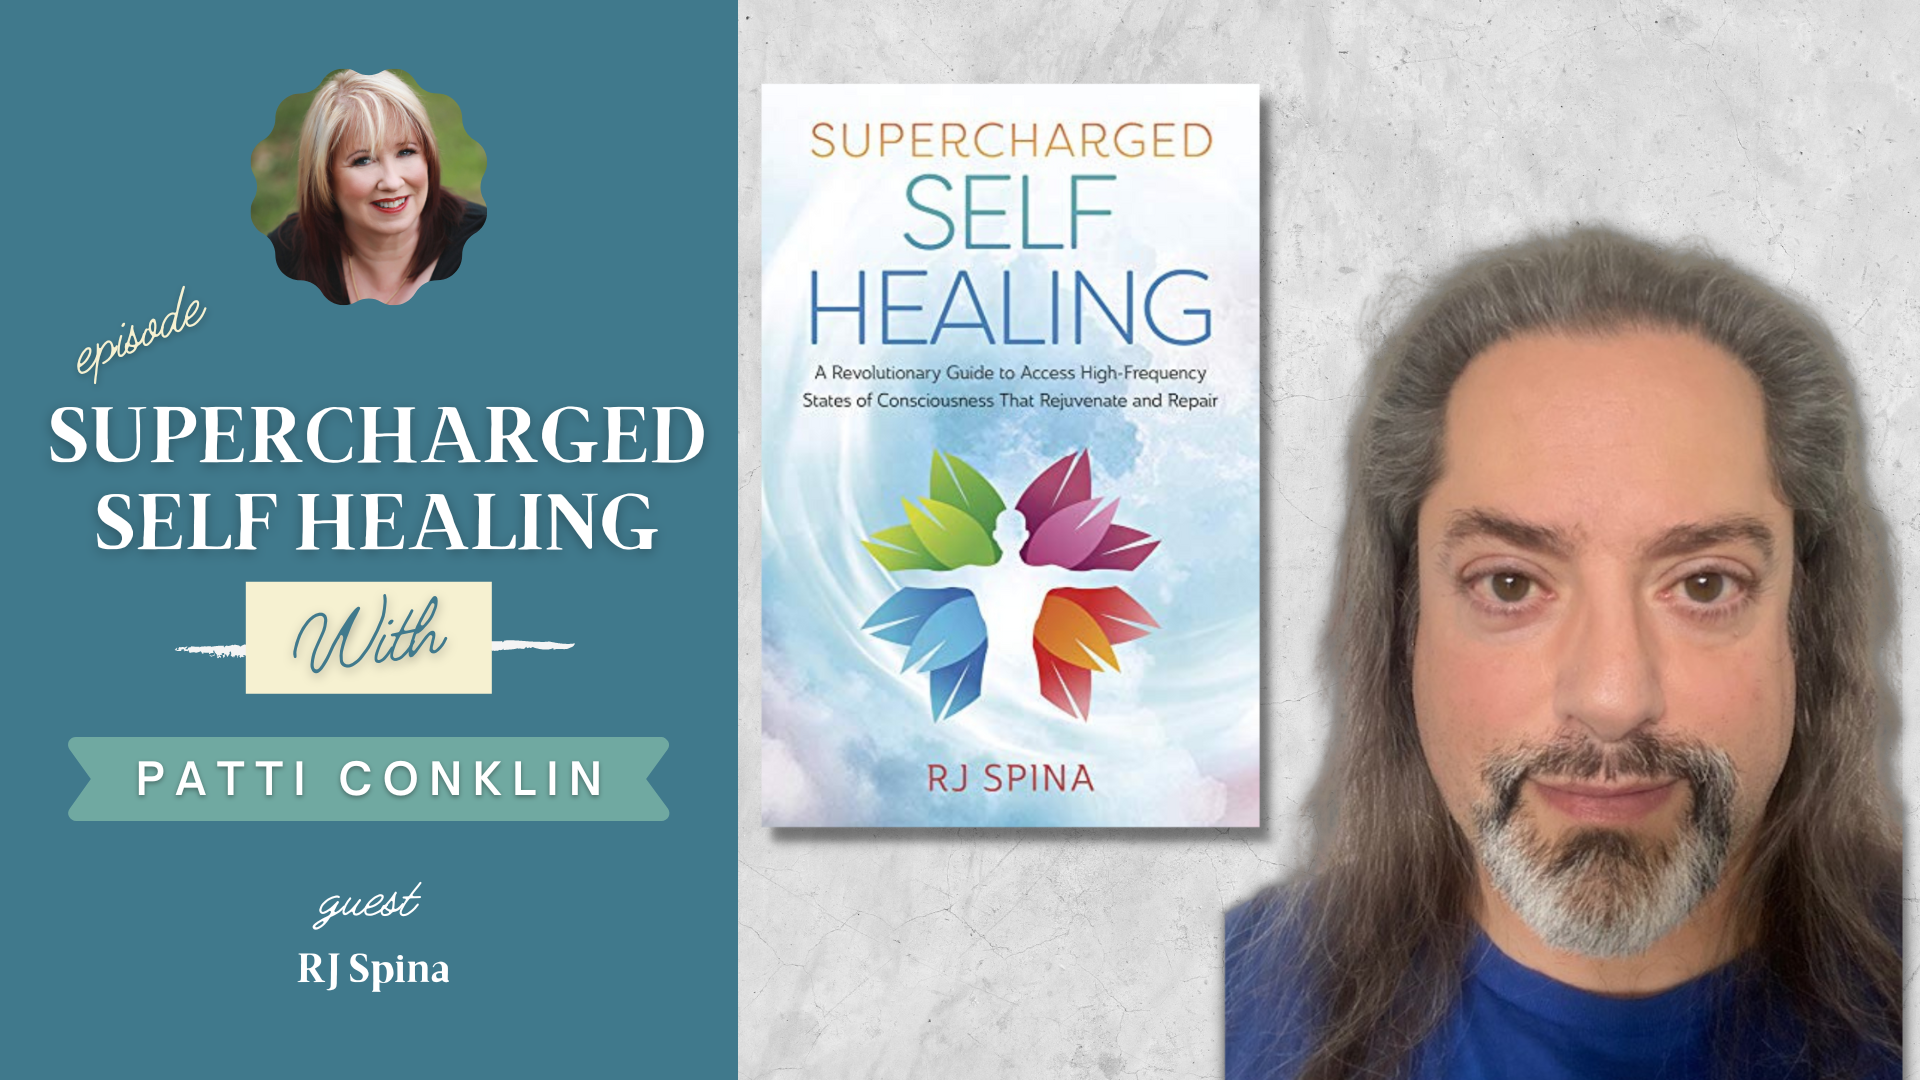 Supercharged Self Healing with guest RJ Spina and host Patti Conklin